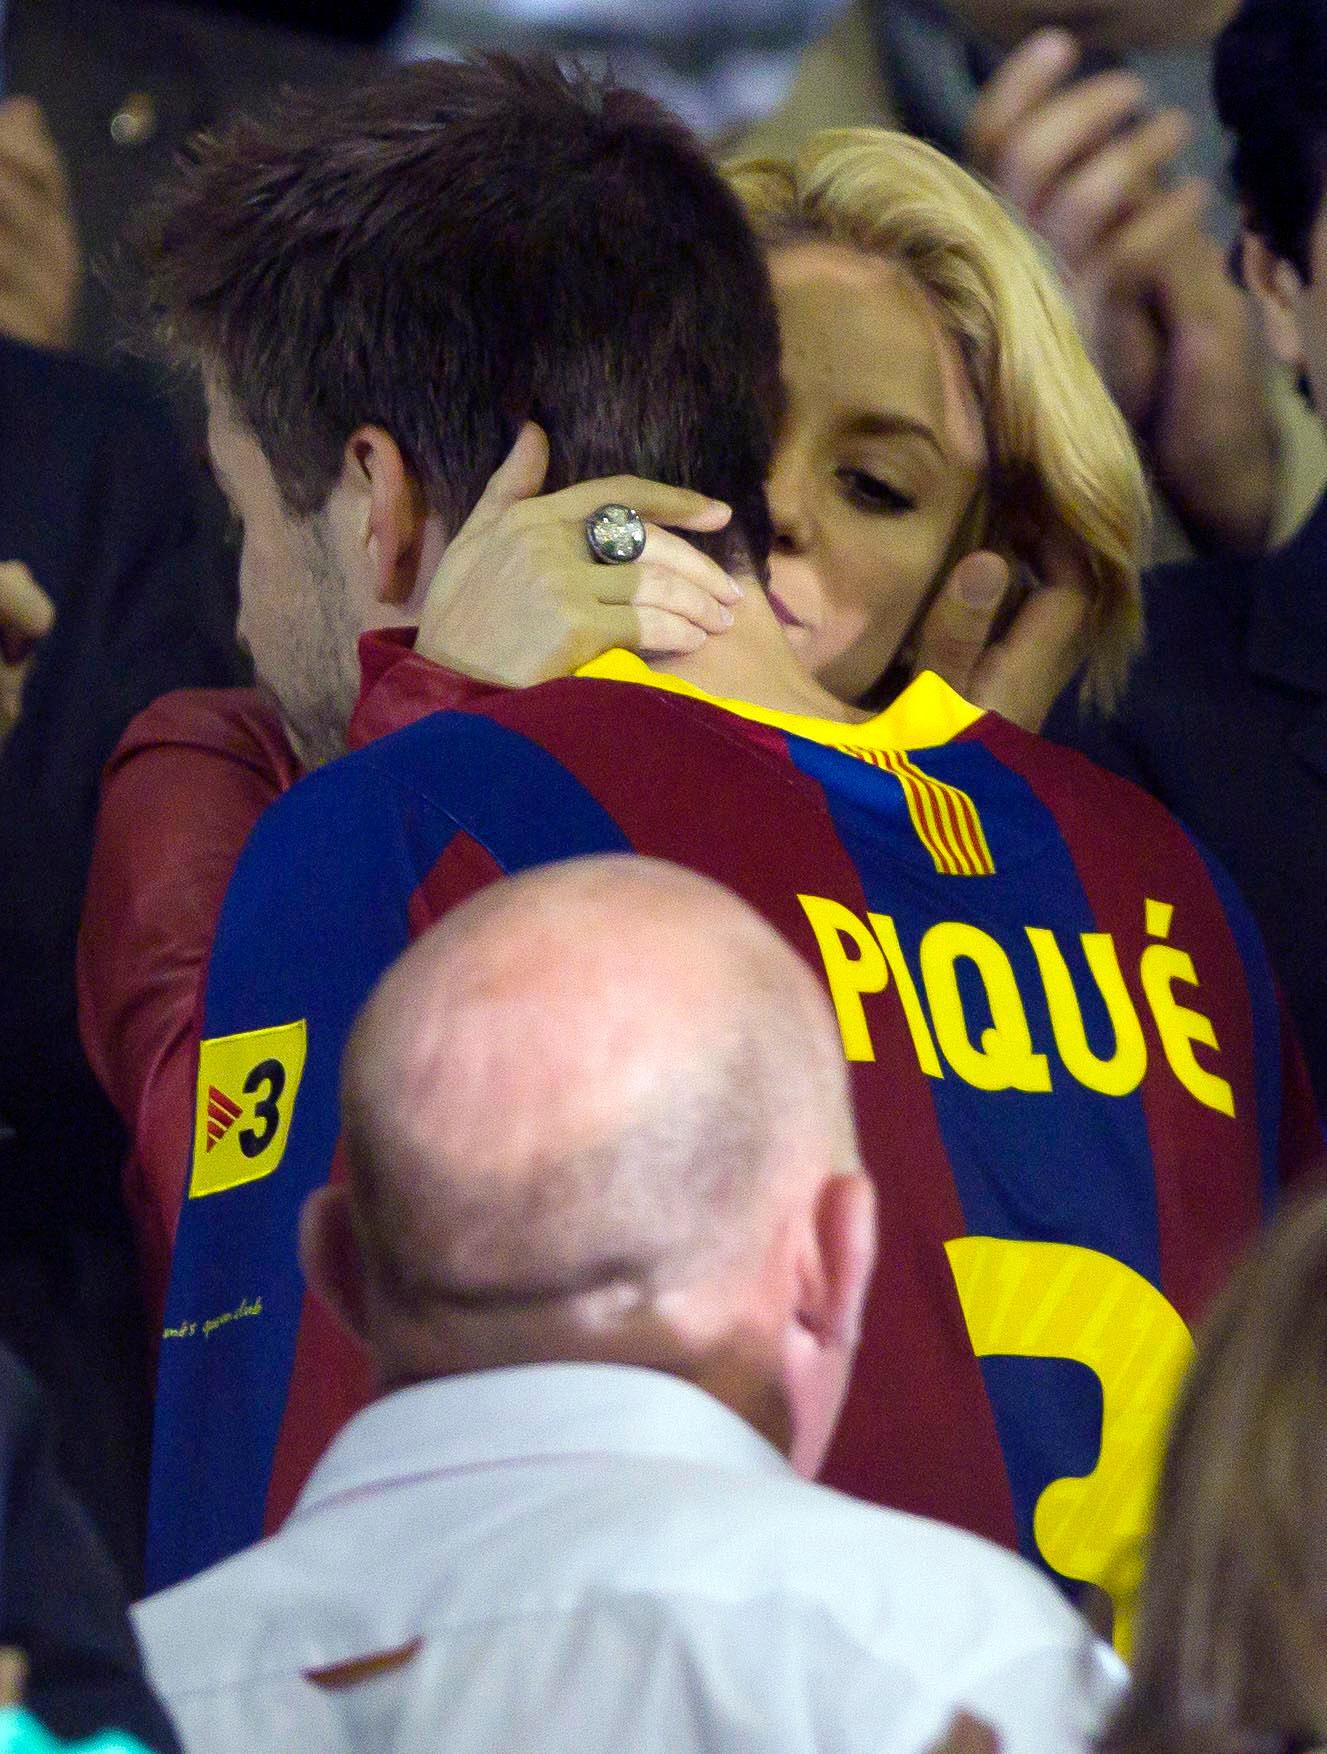 SHAKIRA SUPPORT GERARD PIQUE AFTER LOSING FINAL CUP